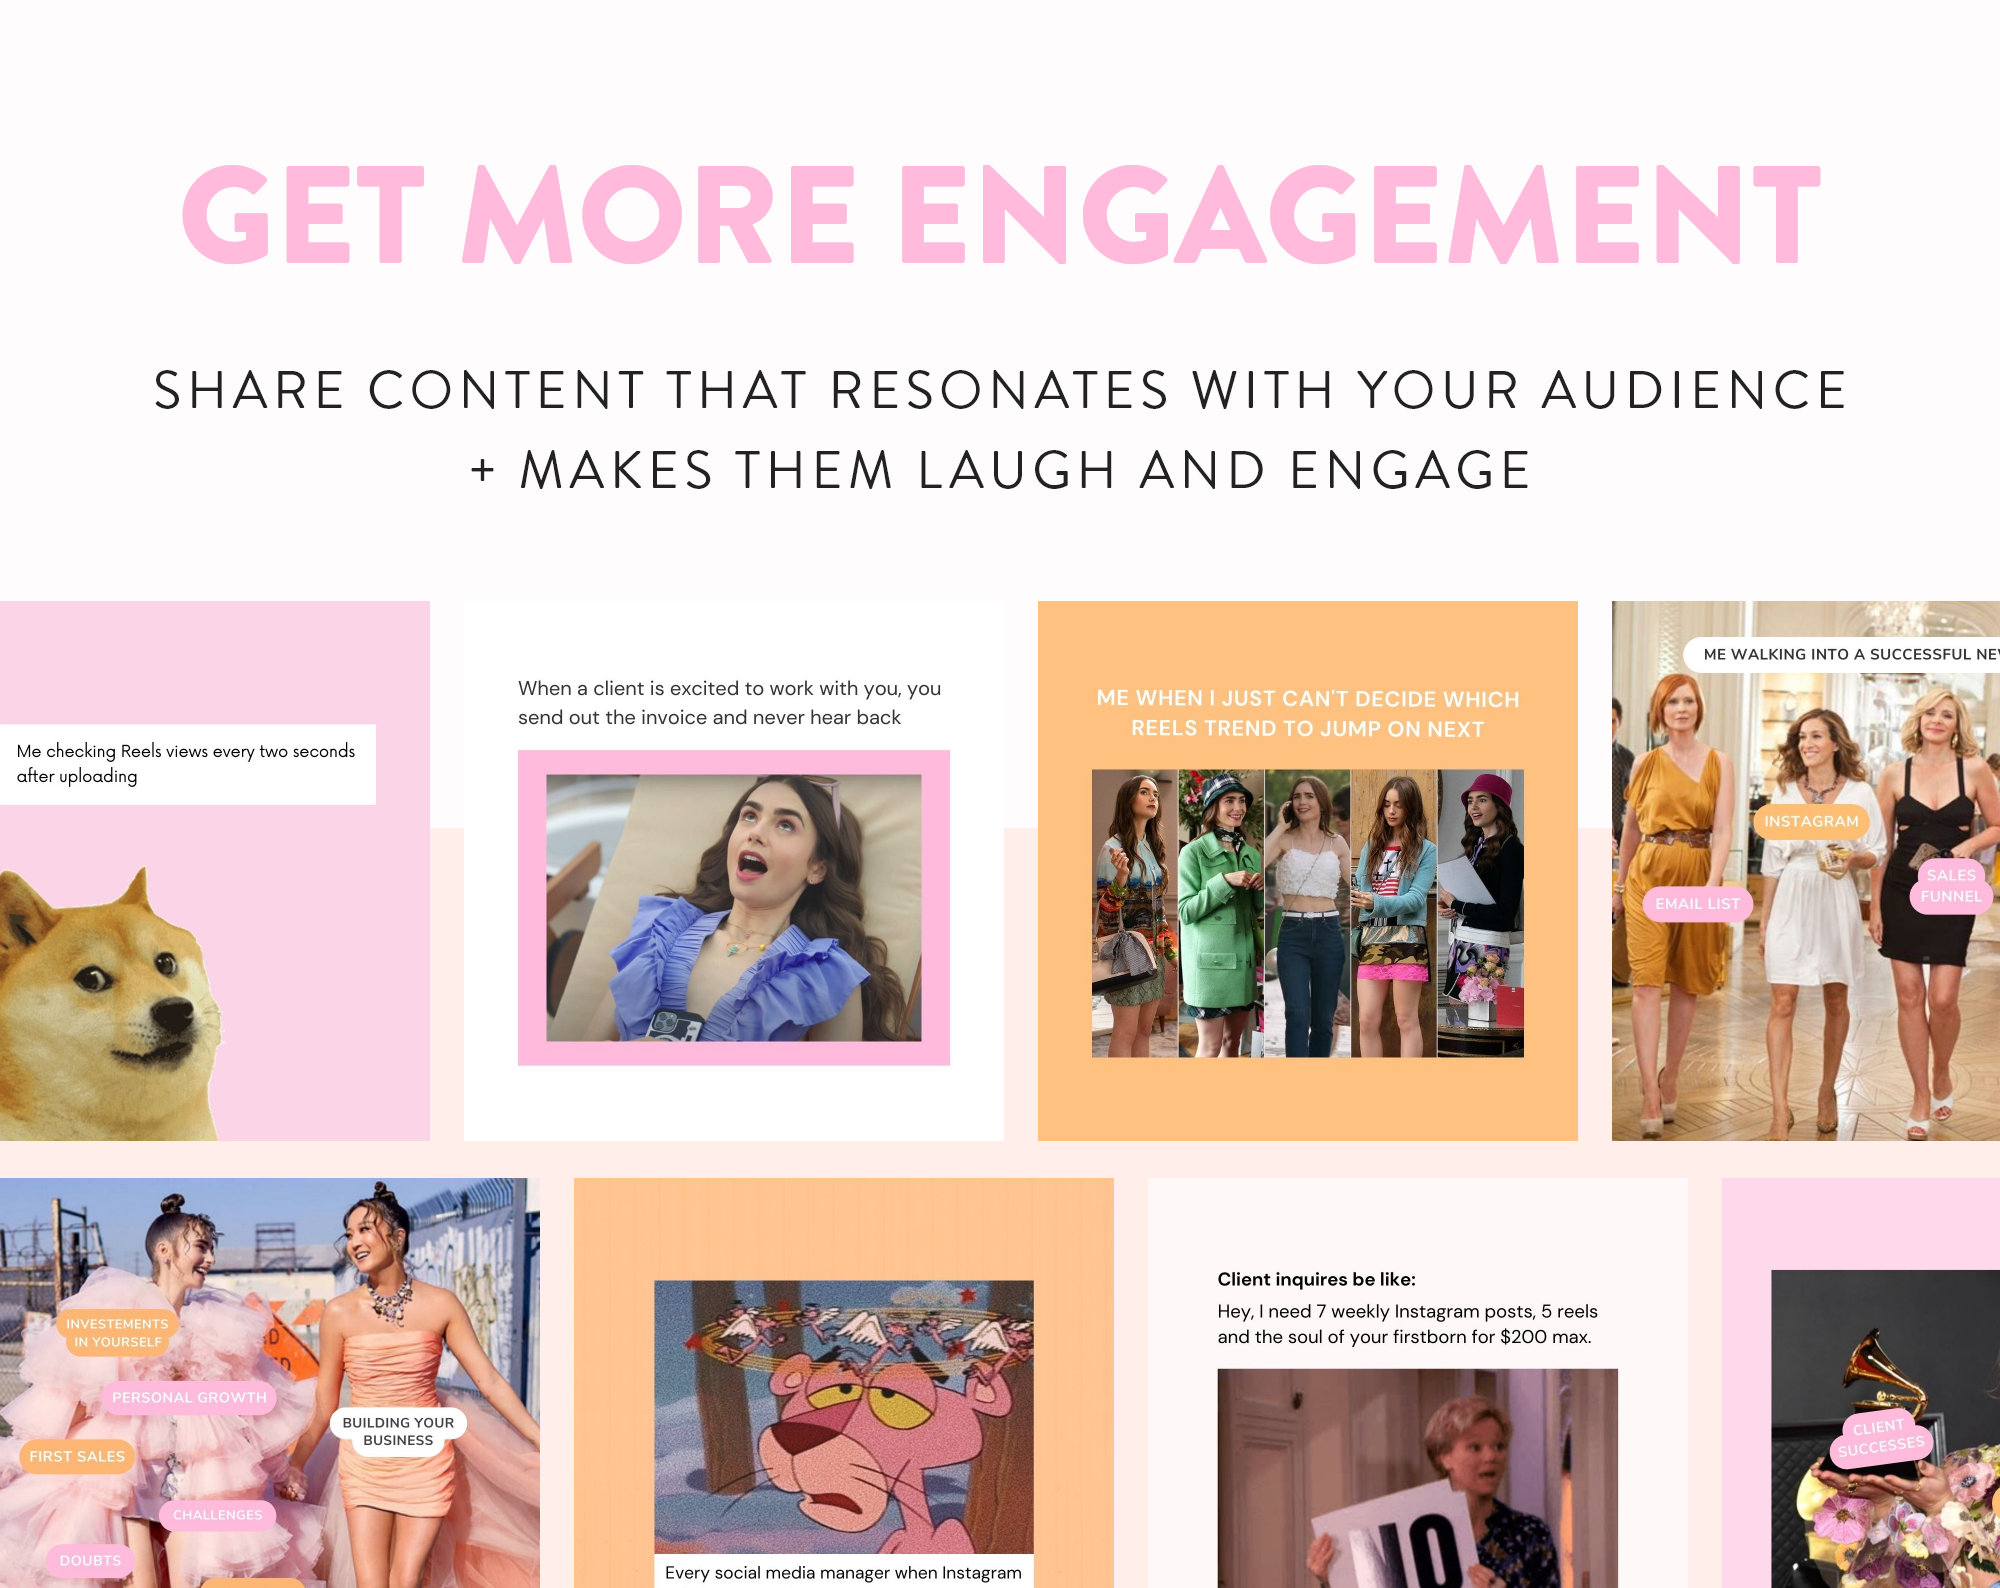 memes-gifs-Instagram-feed-post-templates-canva-engagement-4-2